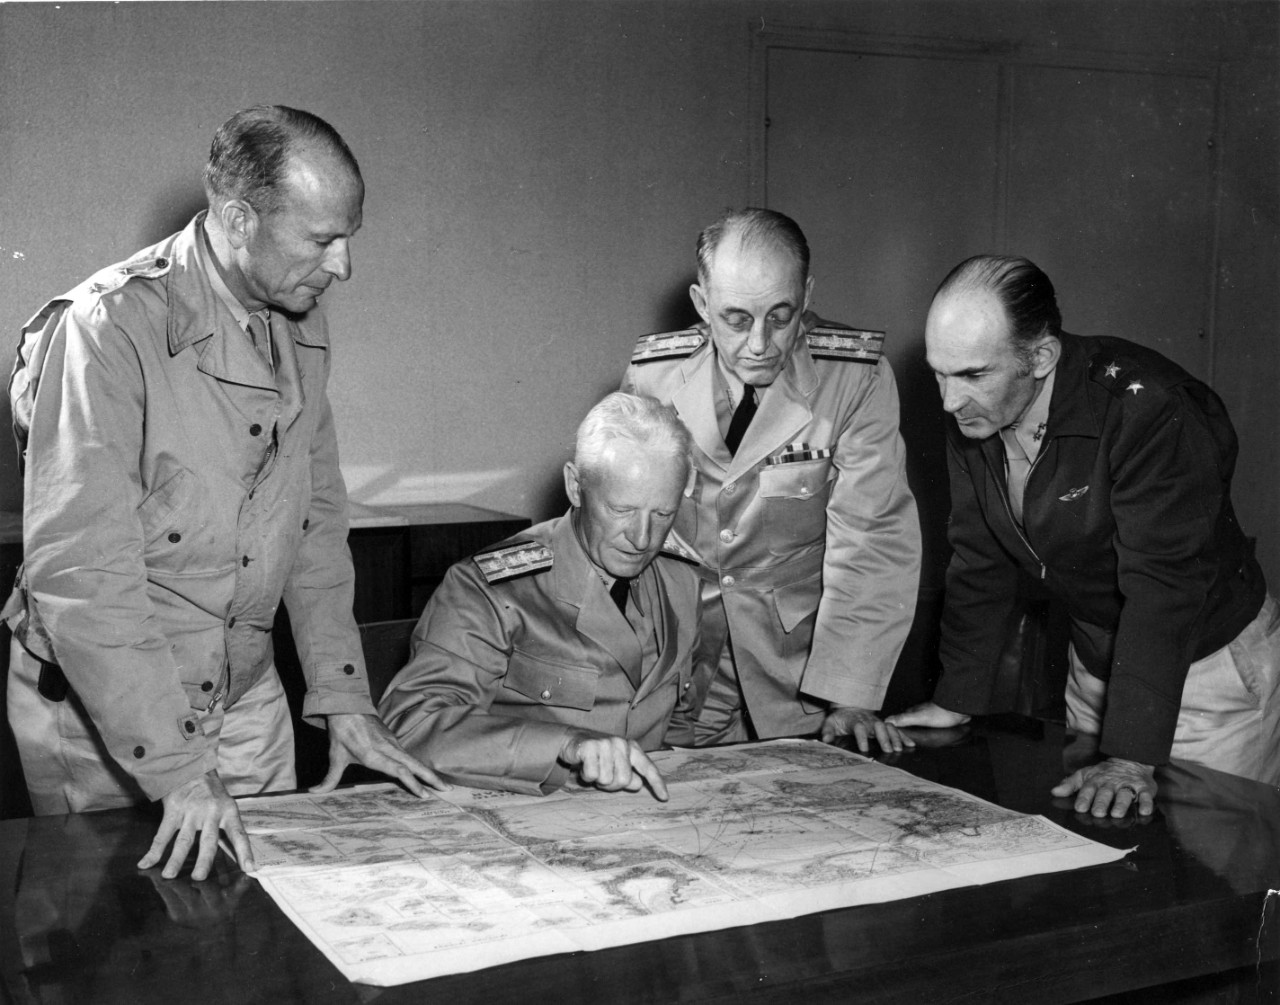 Admiral Chester W. Nimitz, USN, Commander in Chief Pacific Fleet and Pacific Ocean Areas confers with south Pacific area officers, possibly aboard USS Argonne (AG-31) at Noumea, New Caledonia, on 28 September 1942.